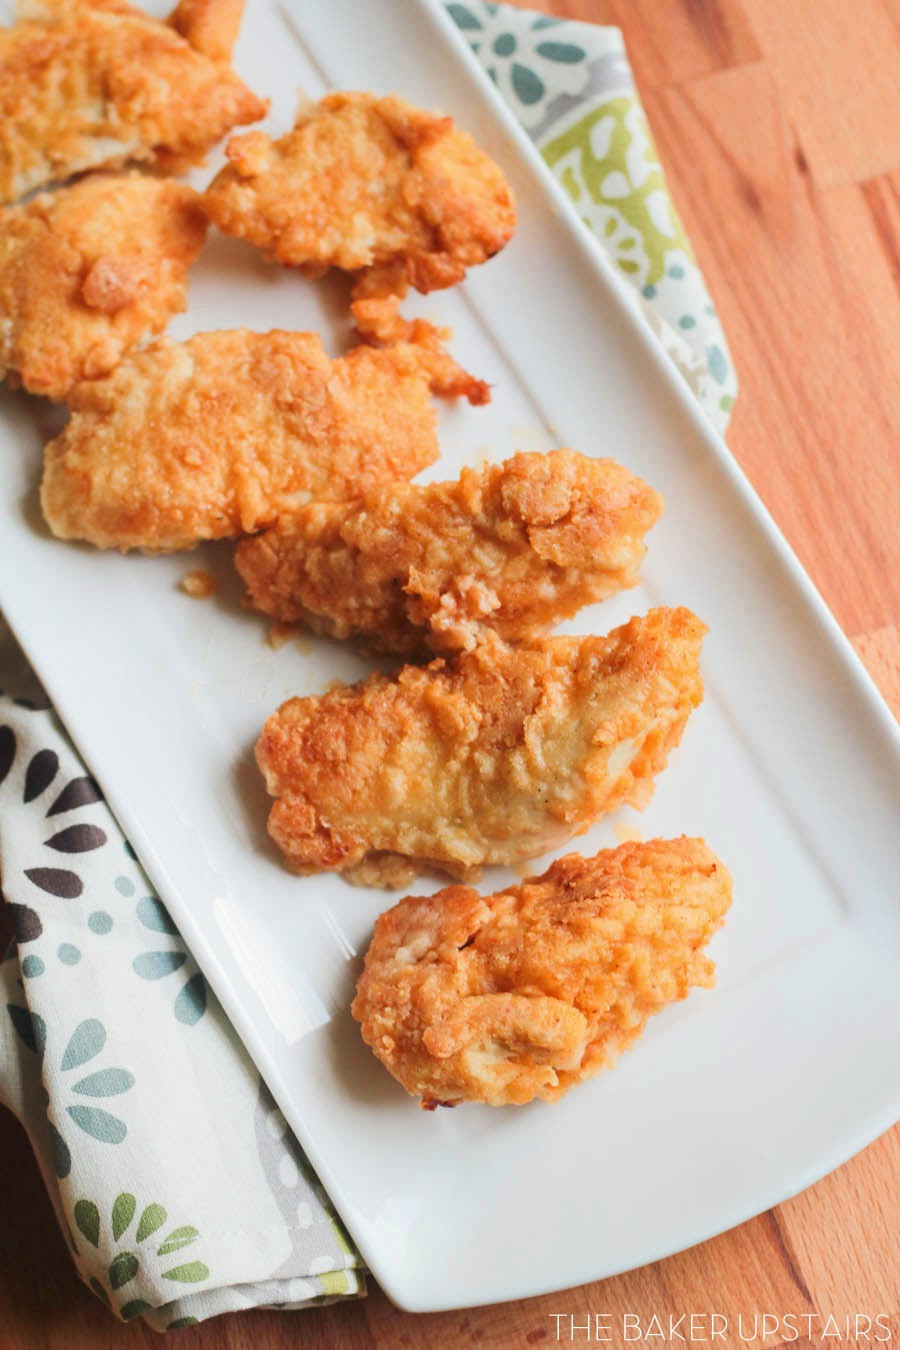 Oven Fried Chicken Recipes
 The Baker Upstairs the best oven fried chicken